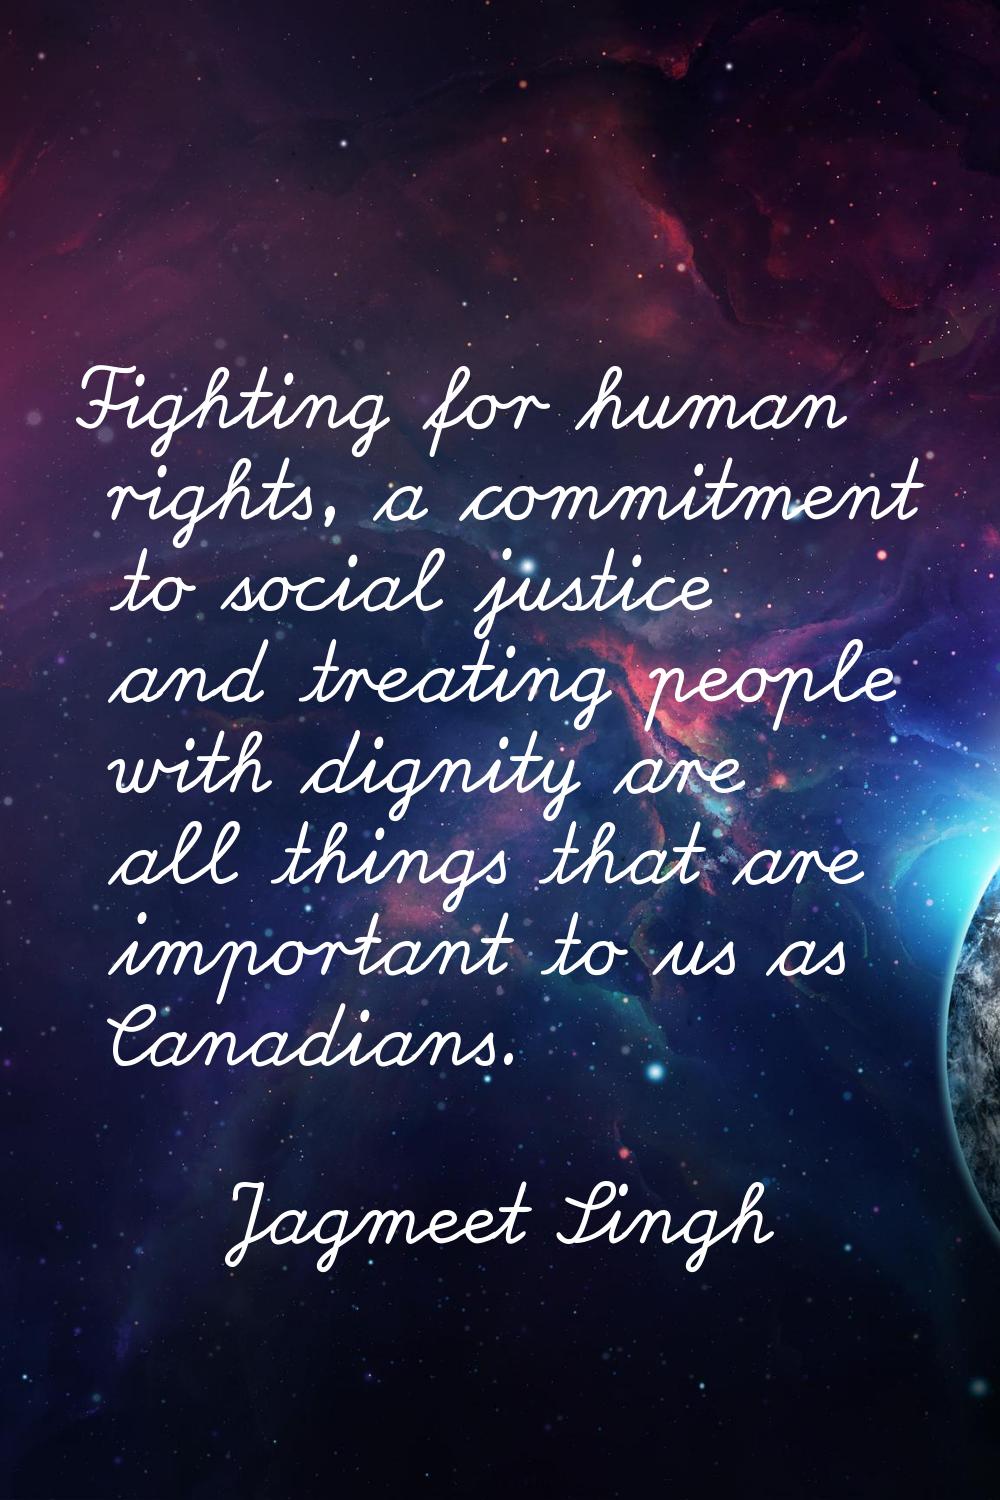 Fighting for human rights, a commitment to social justice and treating people with dignity are all 